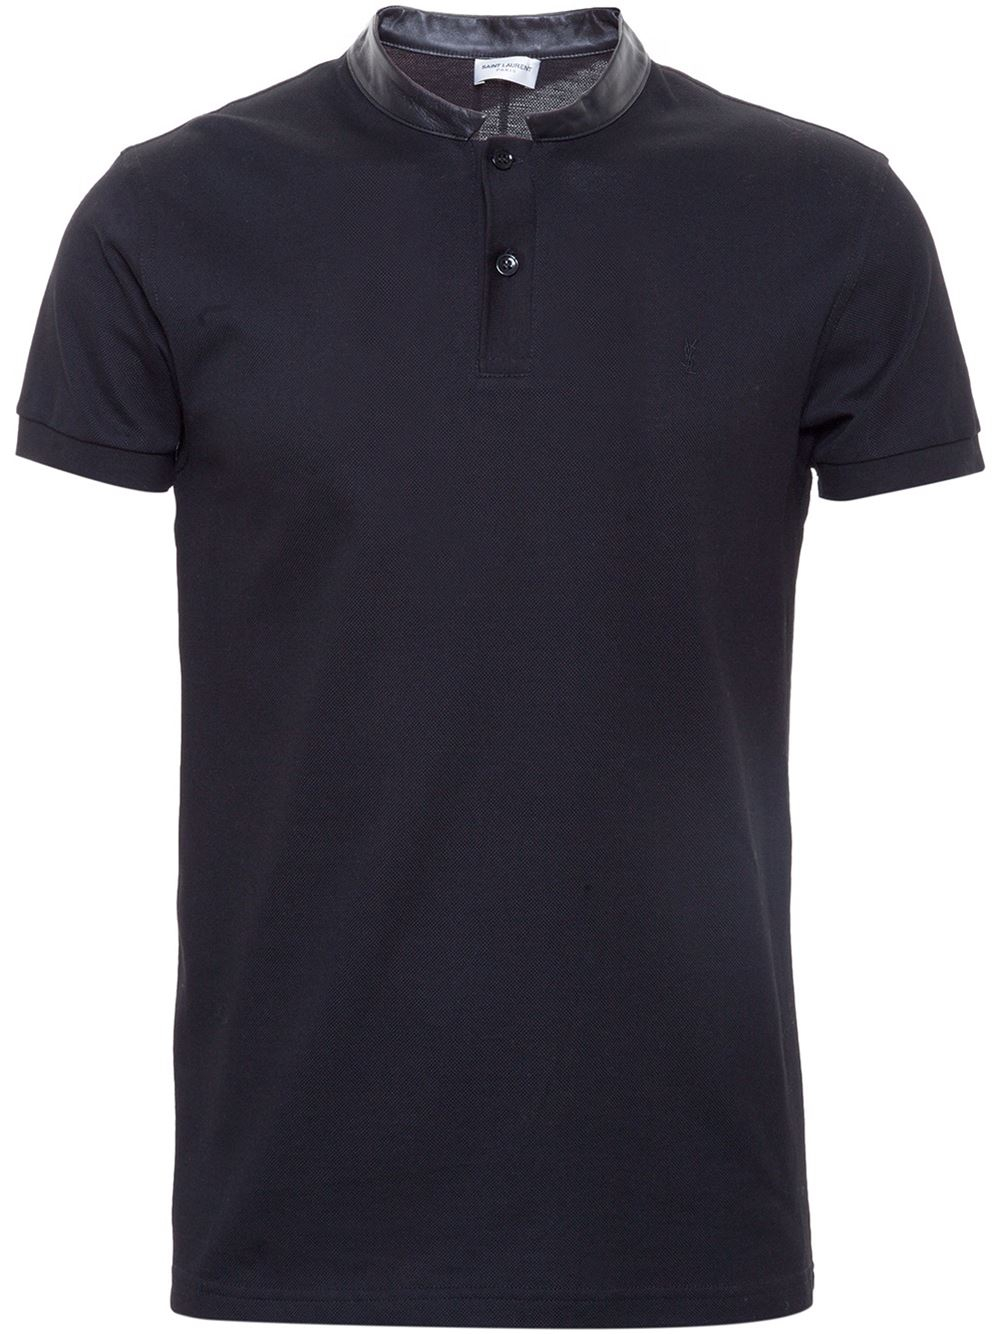 Lyst - Saint laurent Leather Band-Collar Polo Shirt in Black for Men